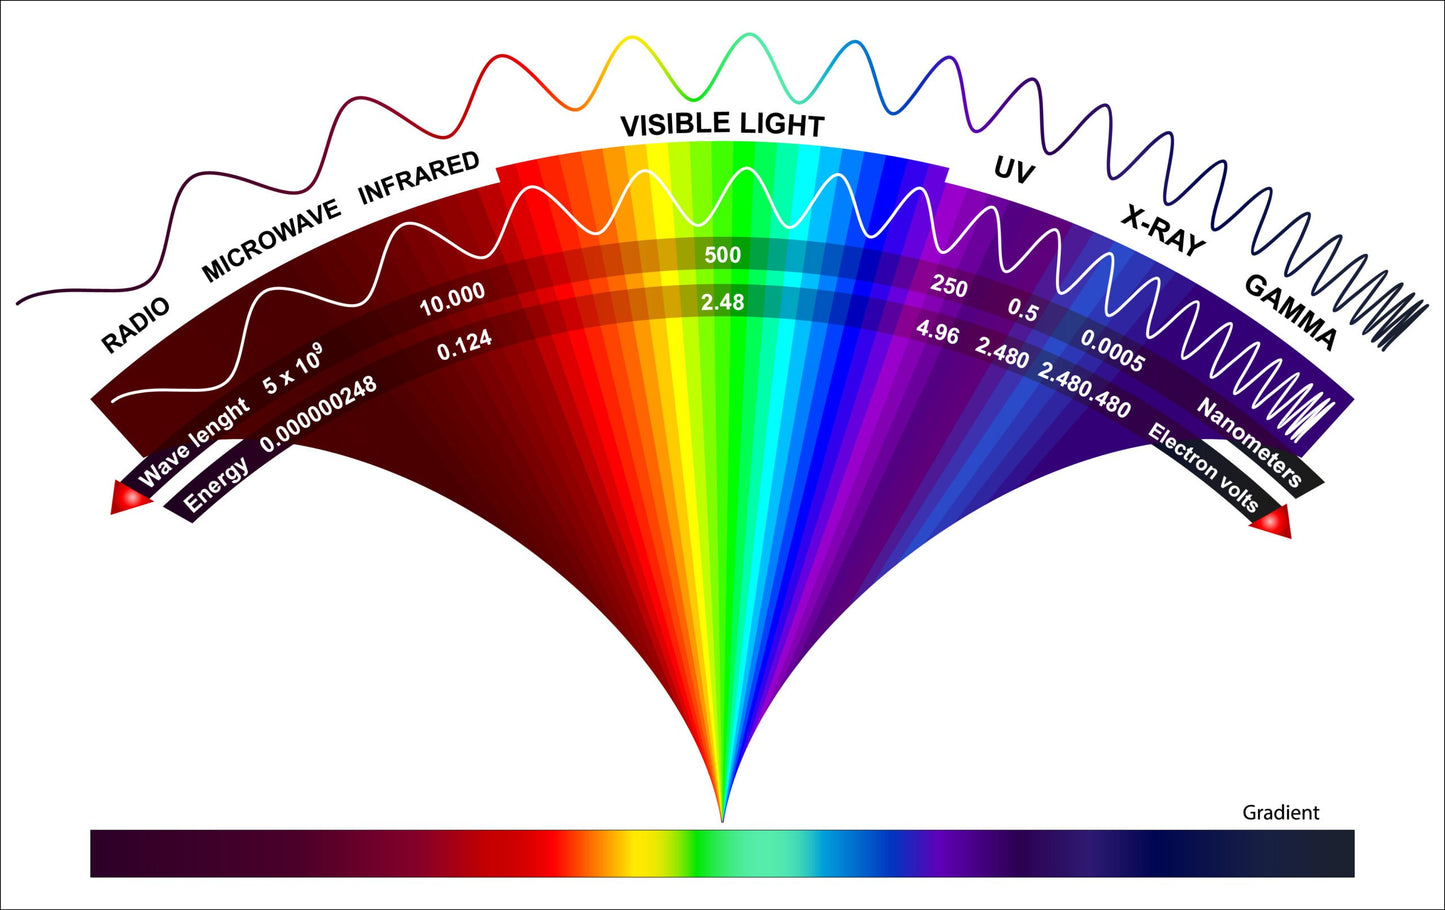 Image depicting the electromagnetic spectrum in rainbow colors from radio waves to gamma rays